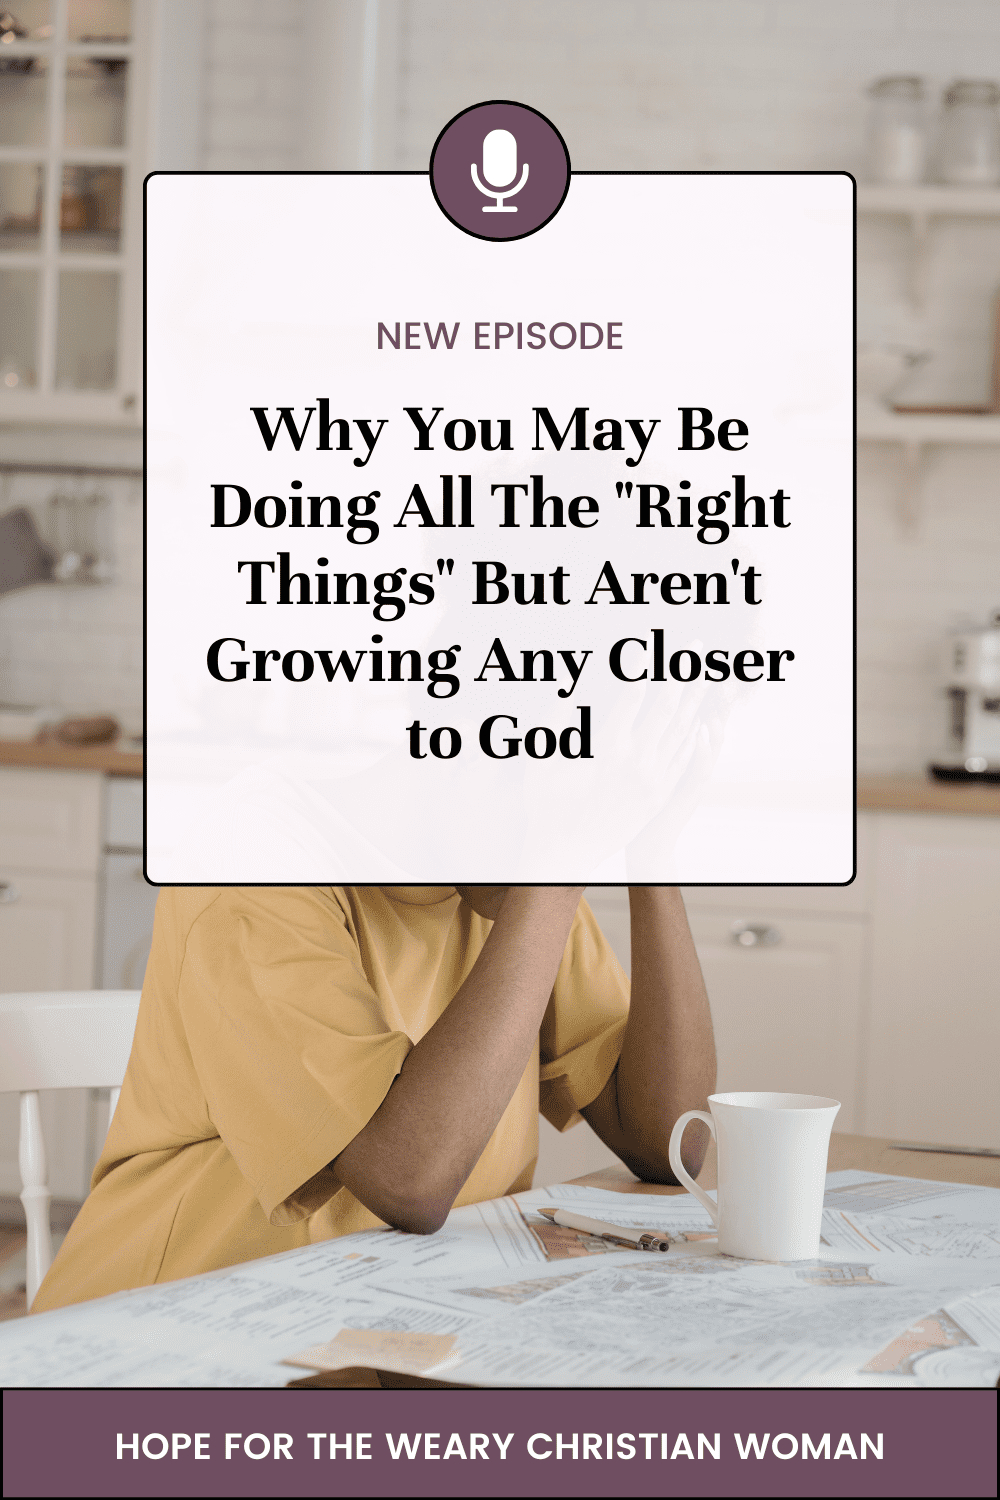 As an introverted Christian woman it can be hard to grow closer to God? Learn the real reason that all the "right things" aren't working for you - plus, tips about how to strengthen your faith as an HSP or highly sensitive introverted Christian woman. via @womenfindinggod